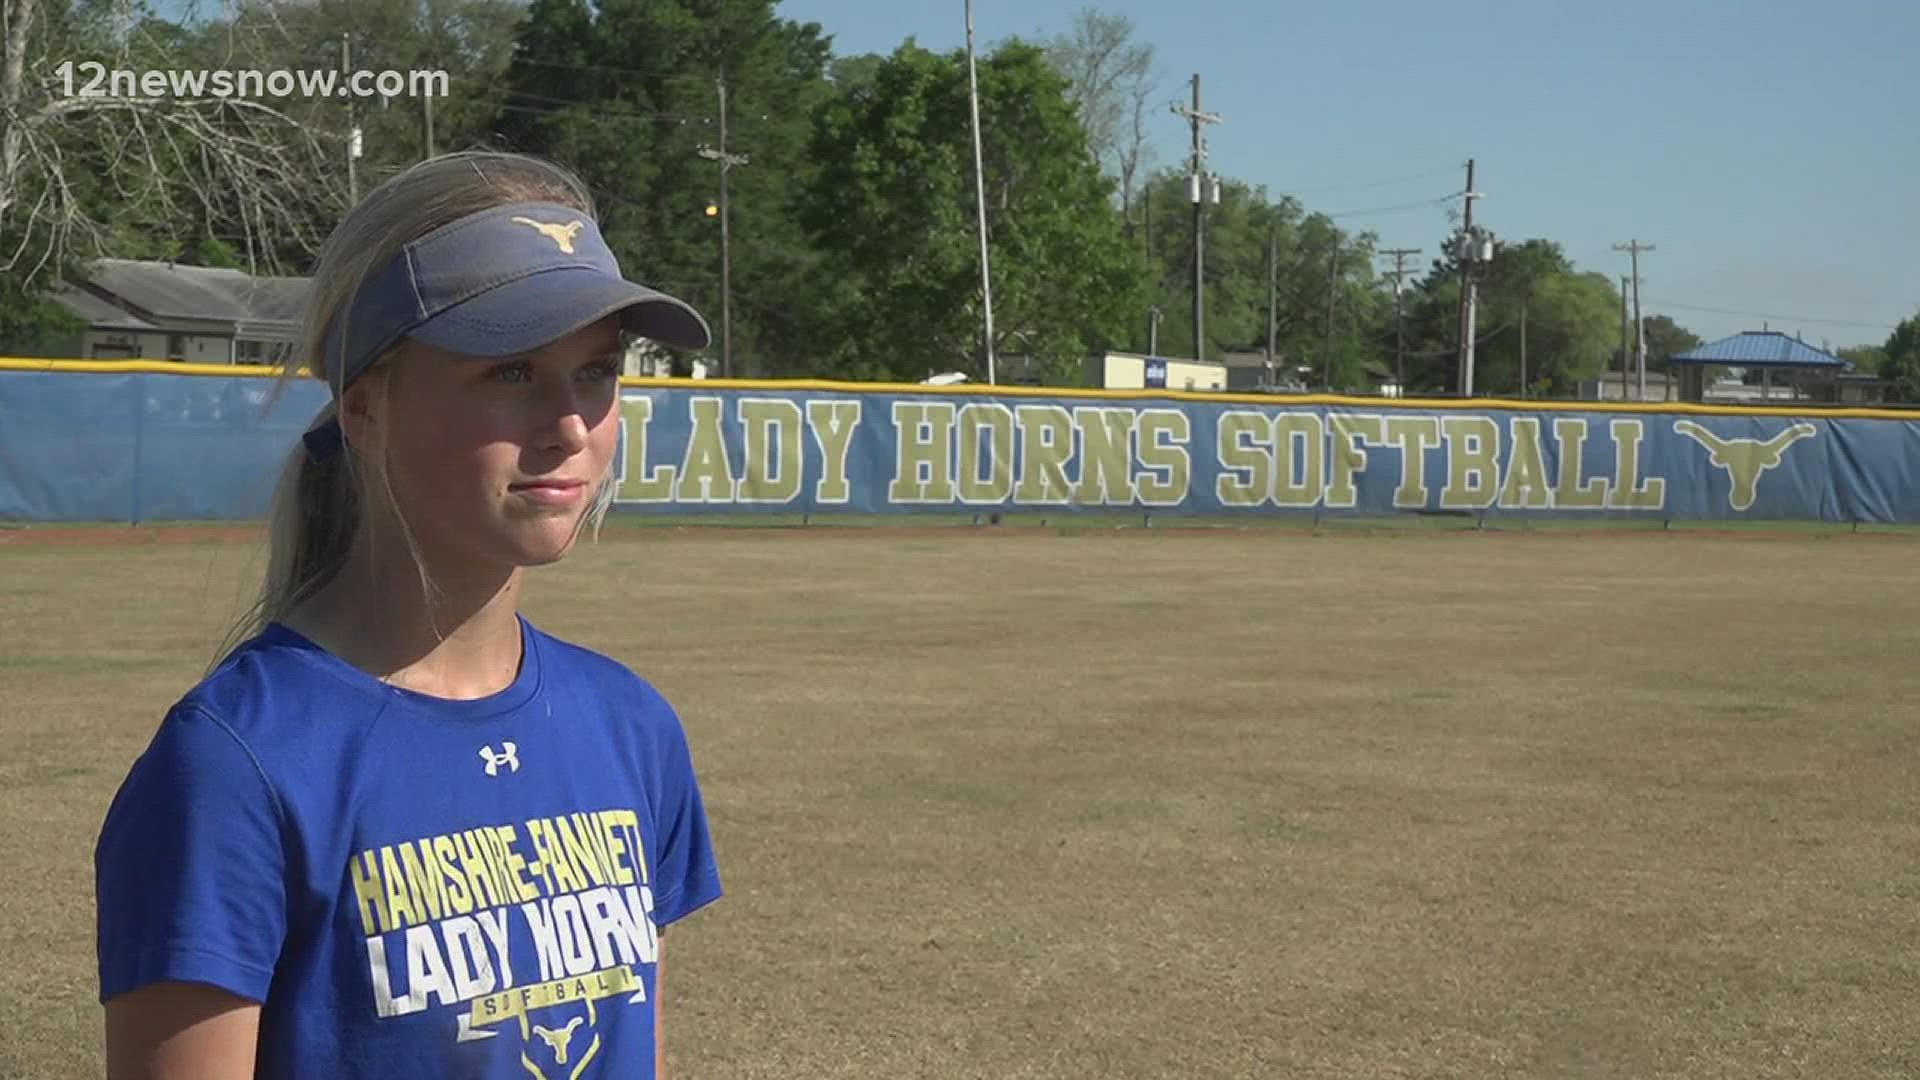 Coach Sims says junior shortstop Jordyn Comer stepped up as a leader during the crucial part of the season.